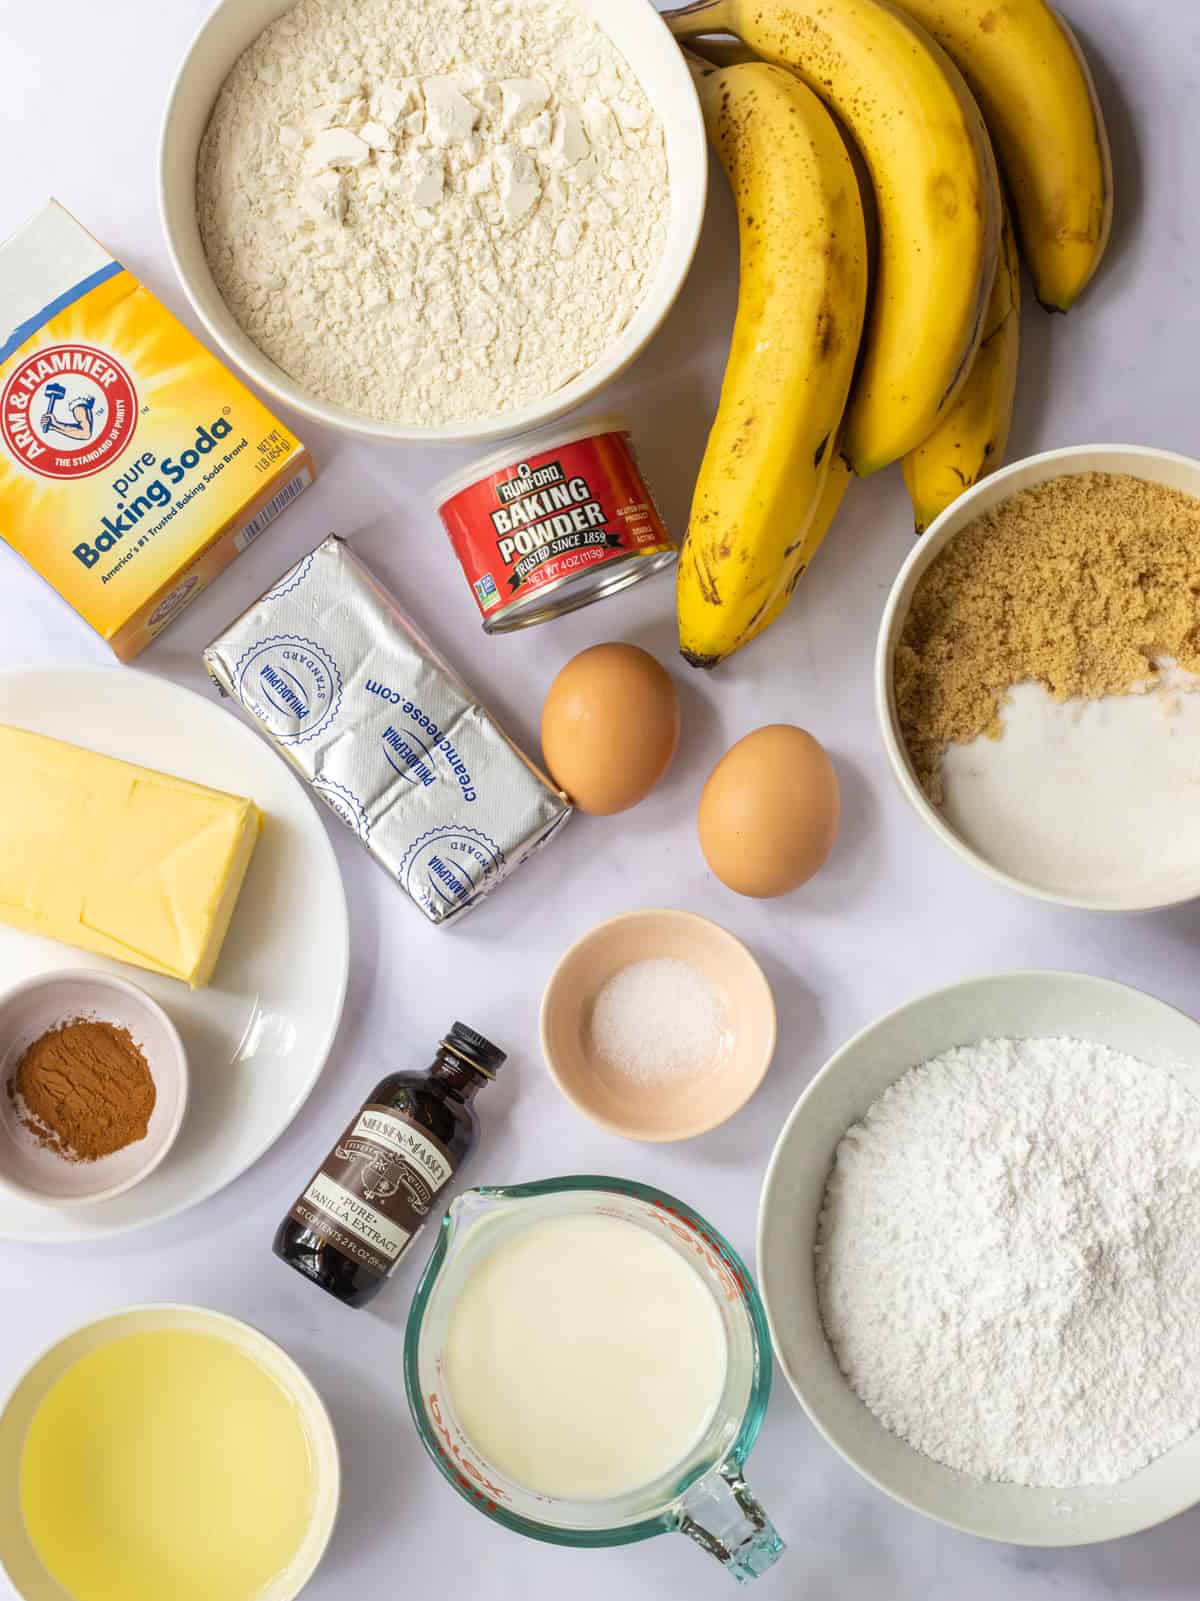 Ingredients for banana cake with cream cheese frosting.